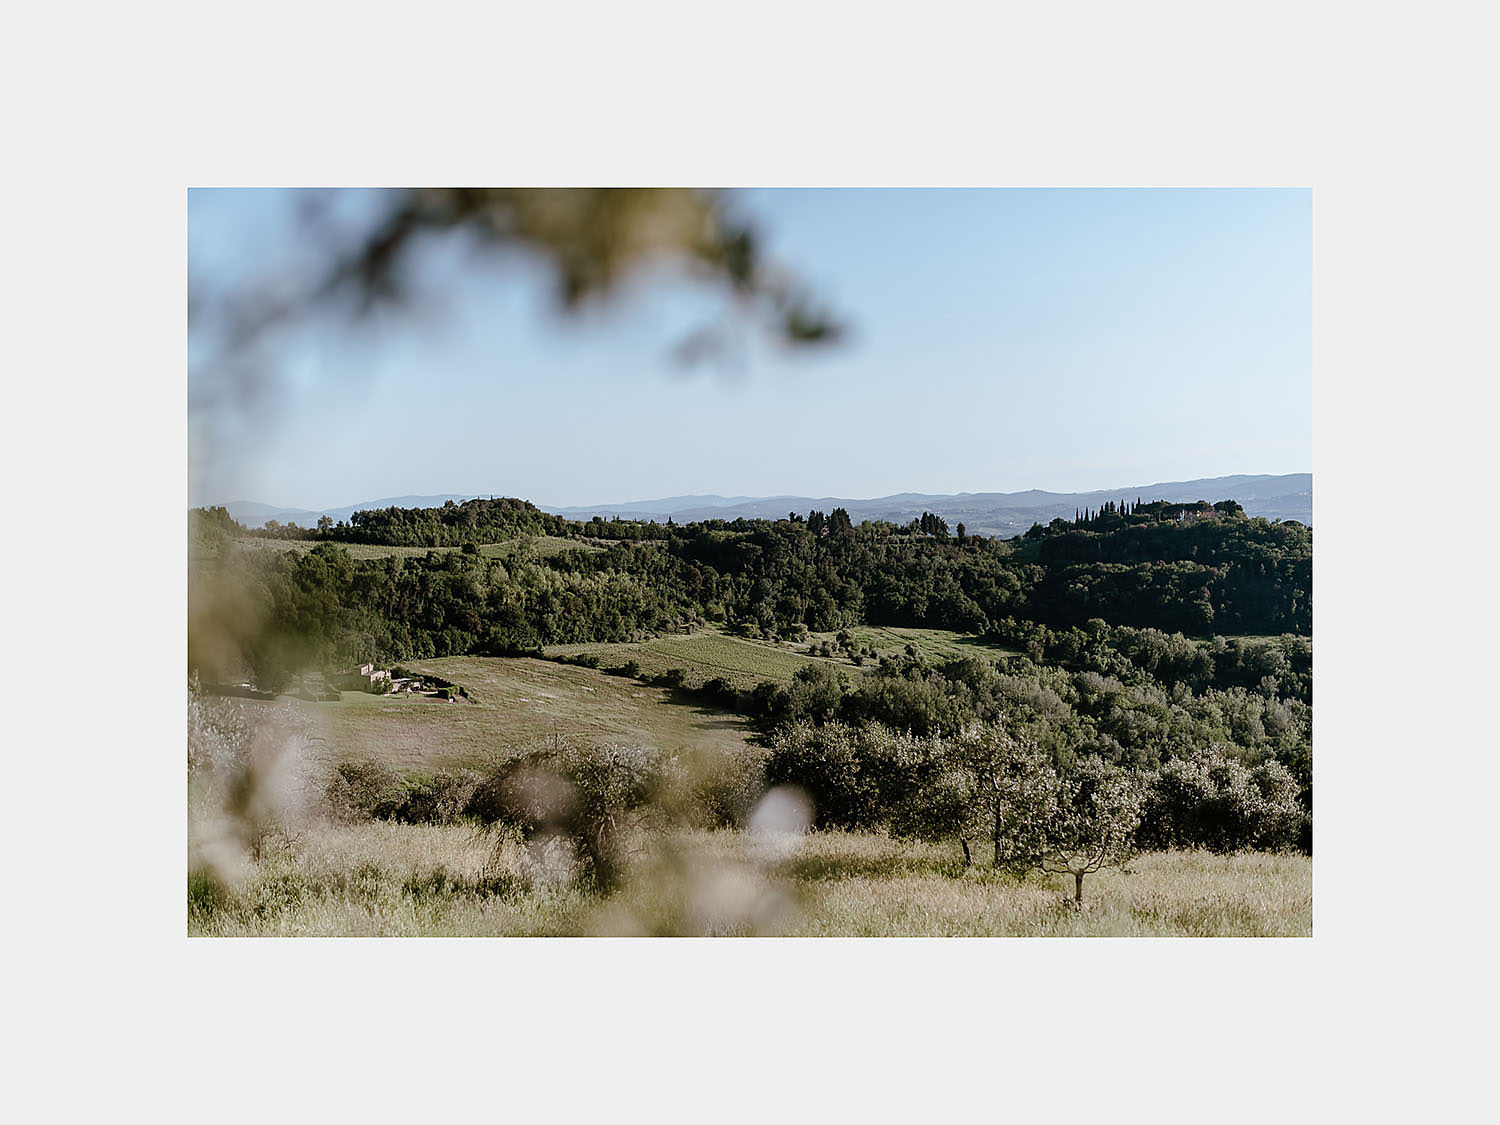 relaxing countryside wedding in tuscany borgo petrognano hills landscape